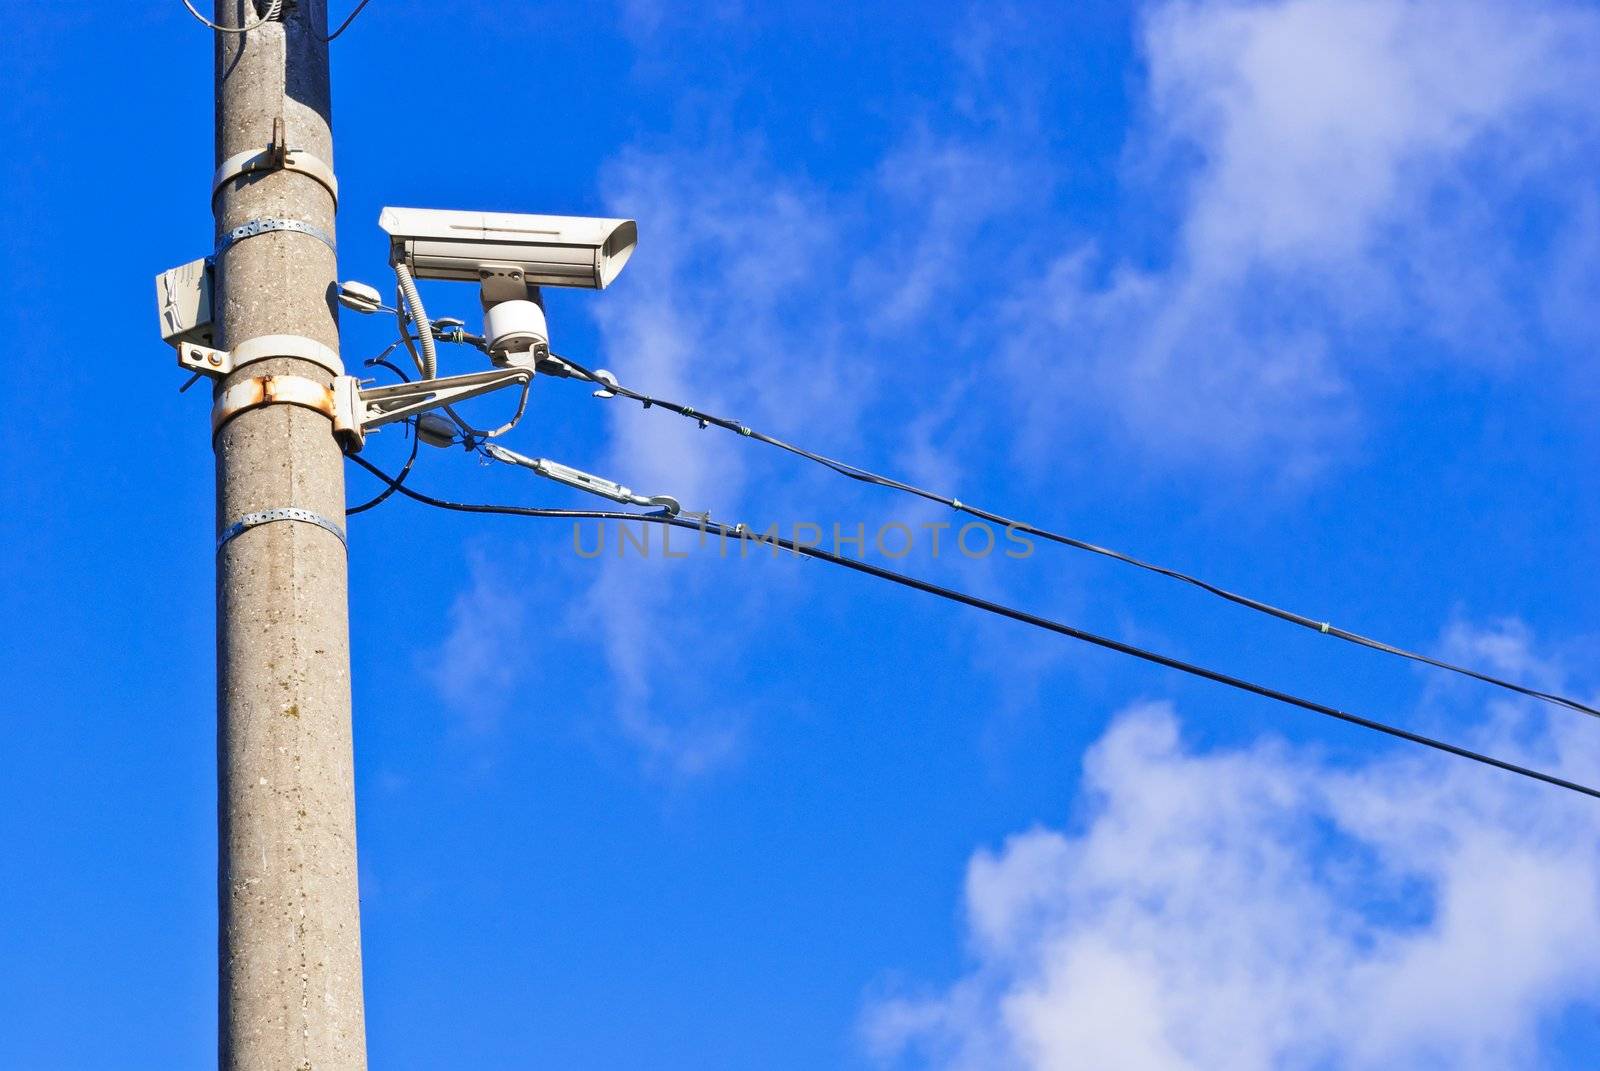 White CCTV on the concrete pole by sasilsolutions